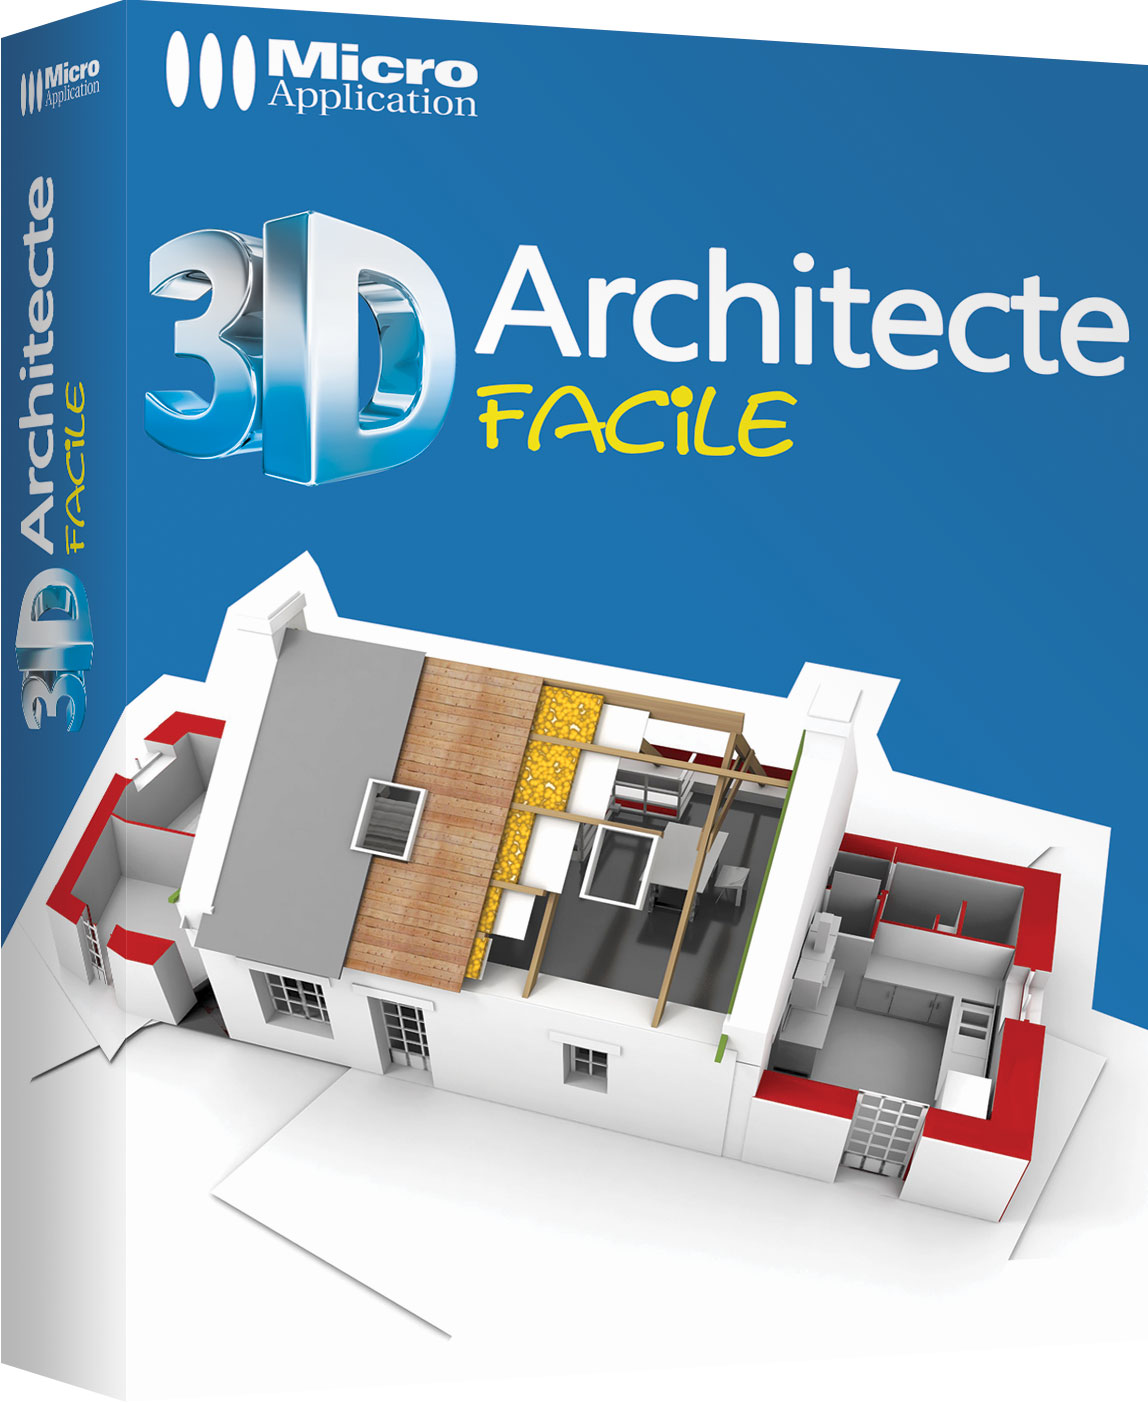 plan architecte 3d  excellent awesome two bedroom apartment floor plans design d for small homes